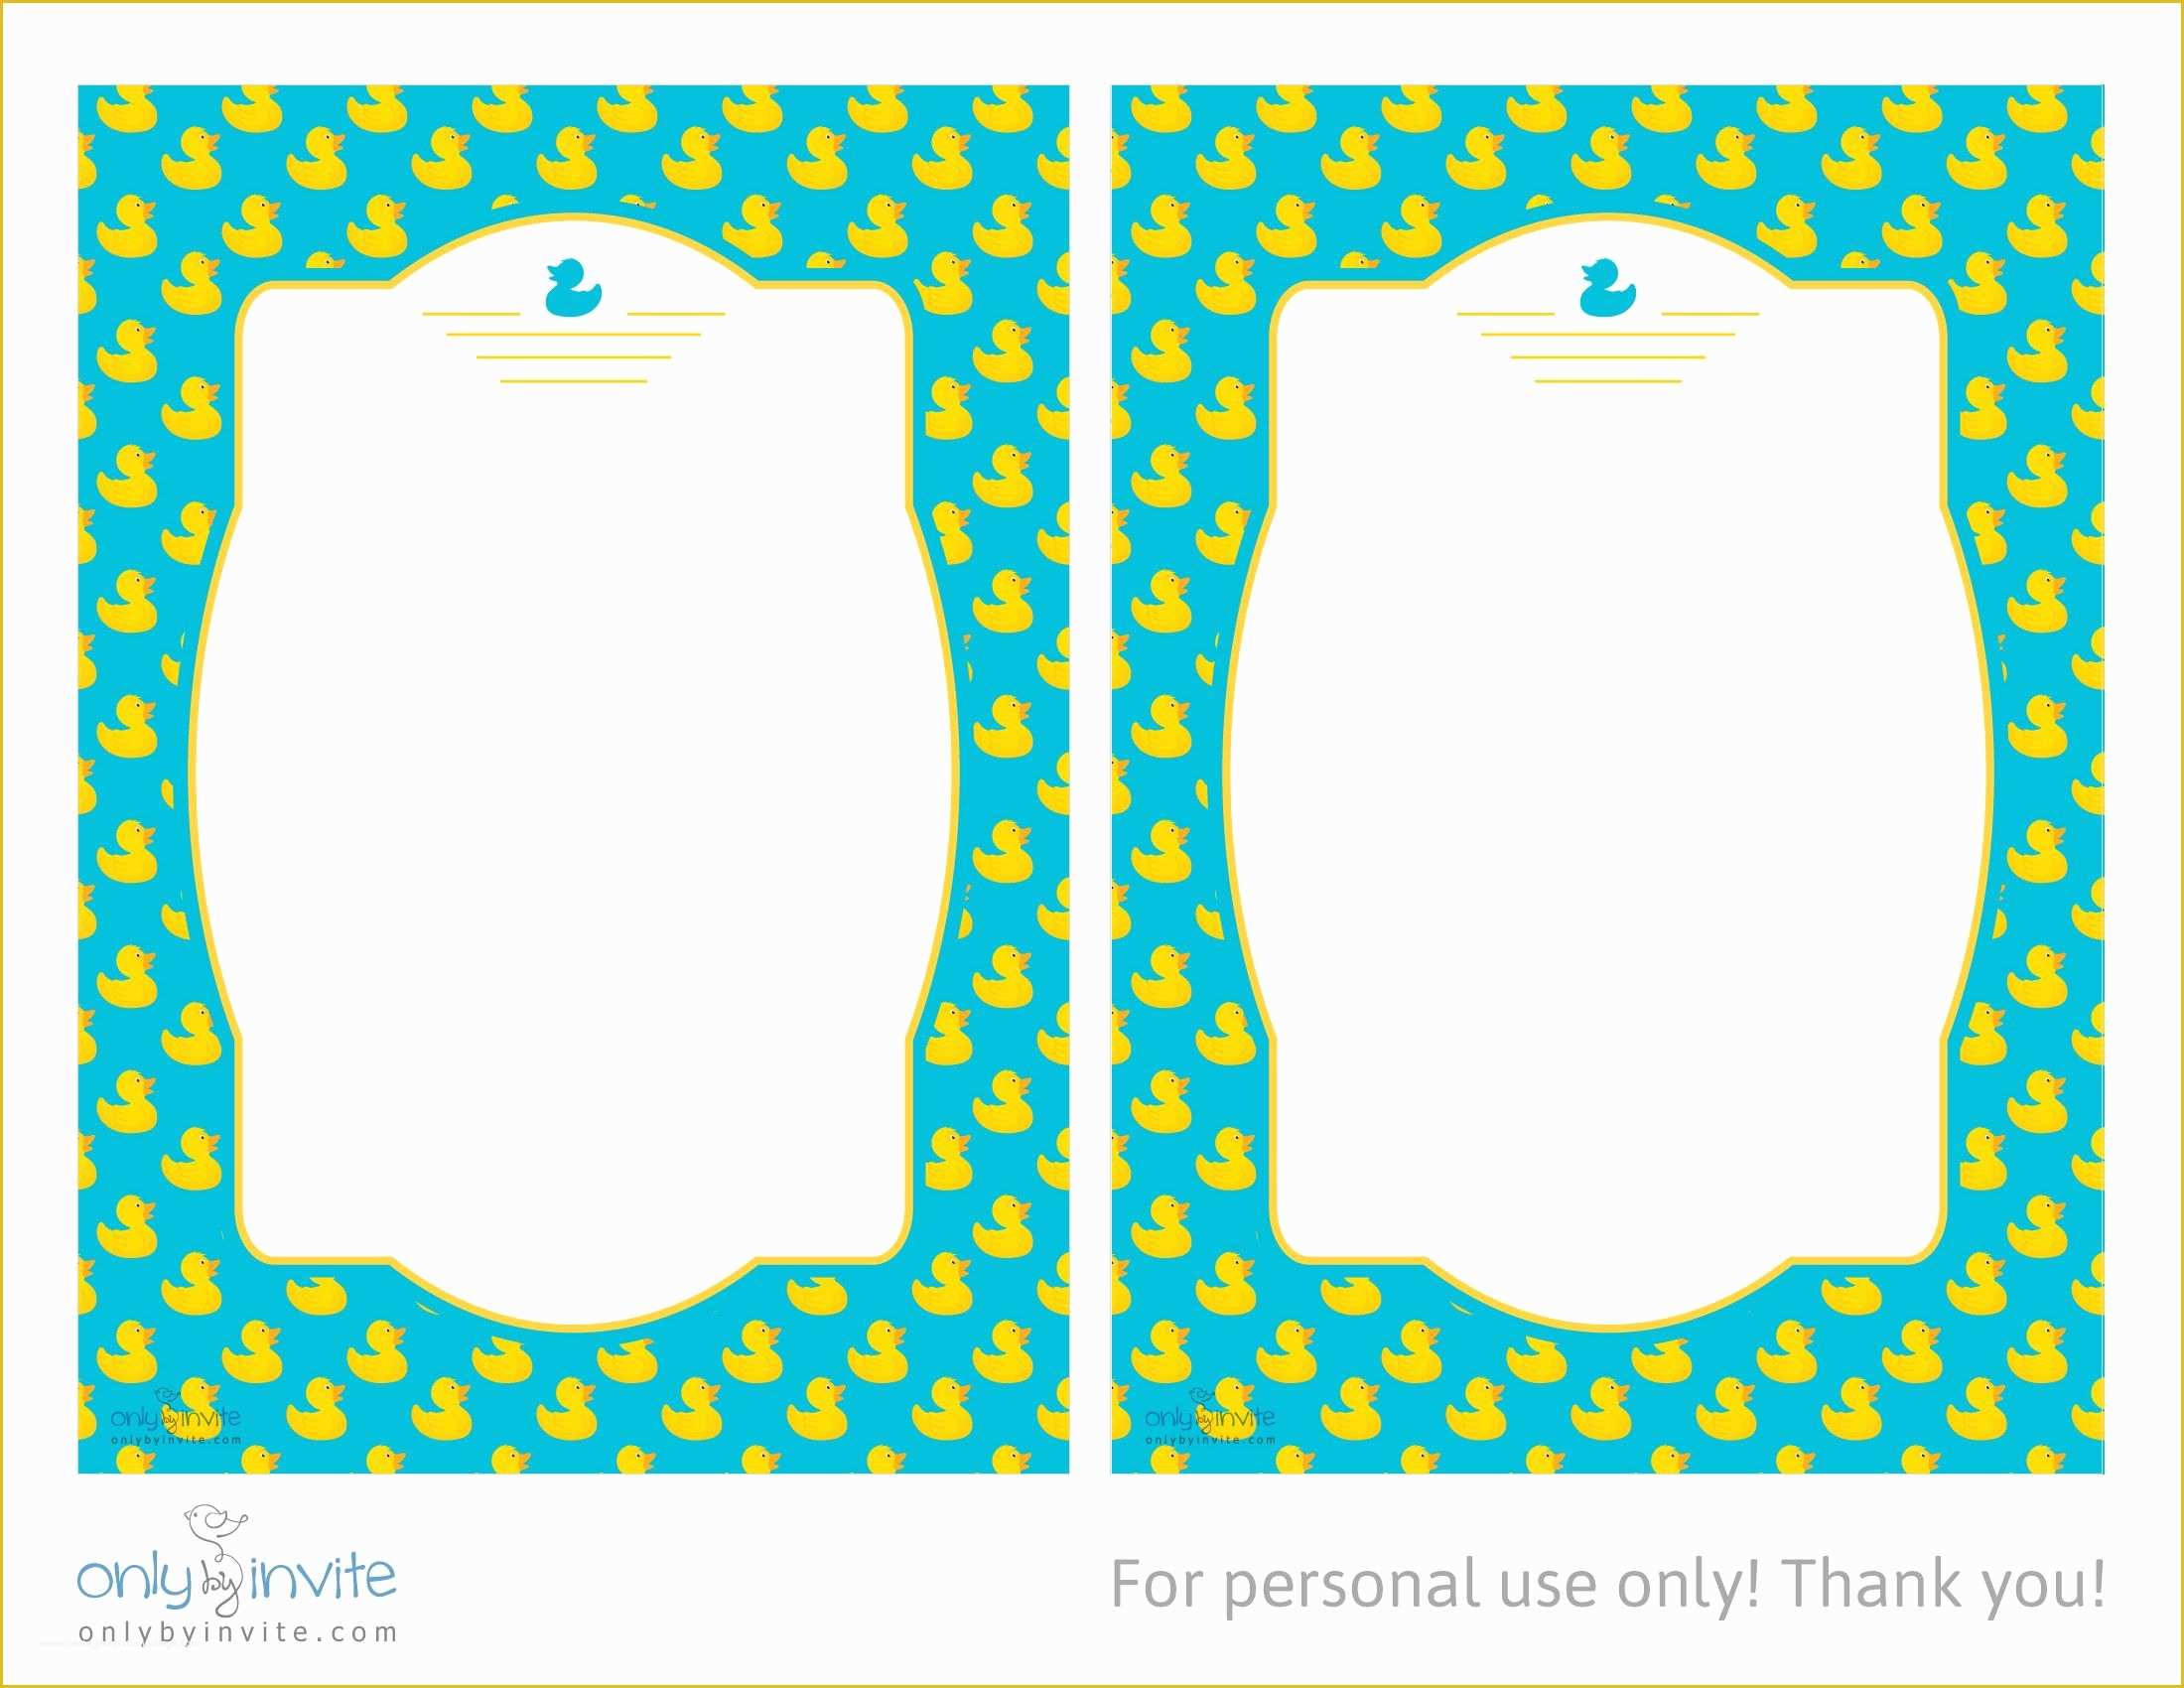 Free Rubber Ducky Baby Shower Invitations Template Of Tropical Printable Rubber Ducky Baby Shower Invitations